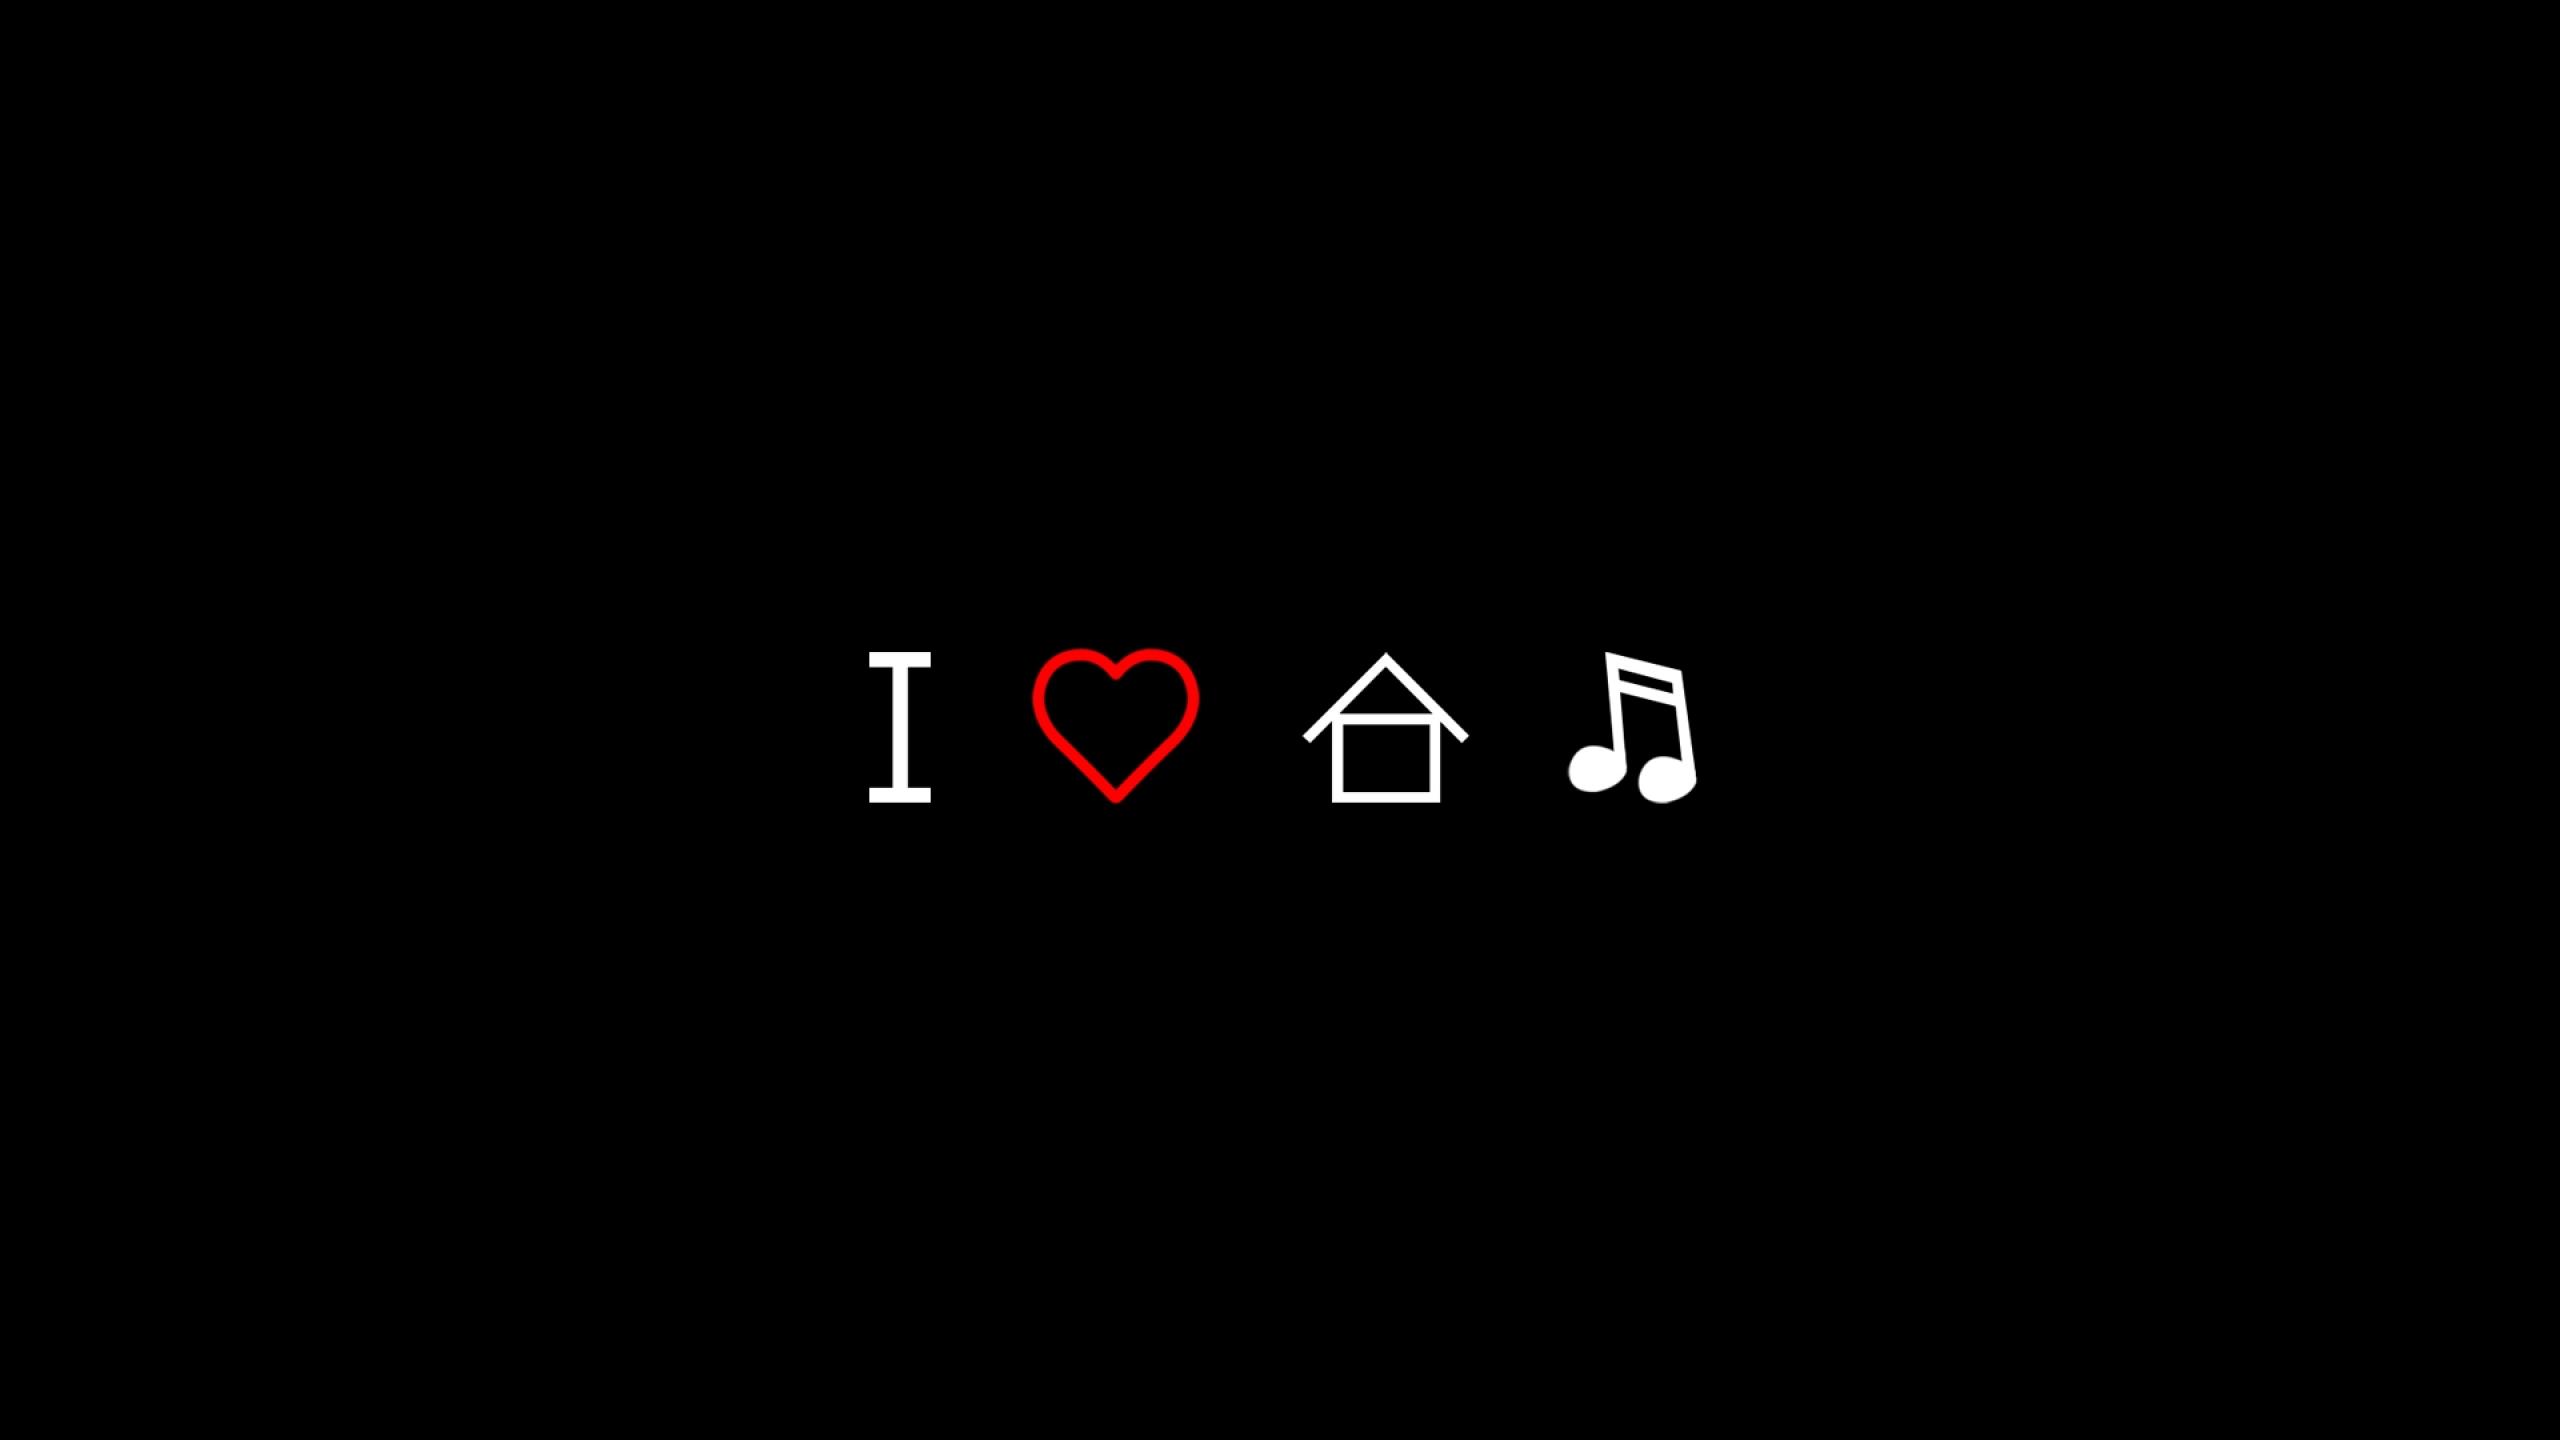 Love Minimalistic Music Hearts House Black Background Ultra Or Dual